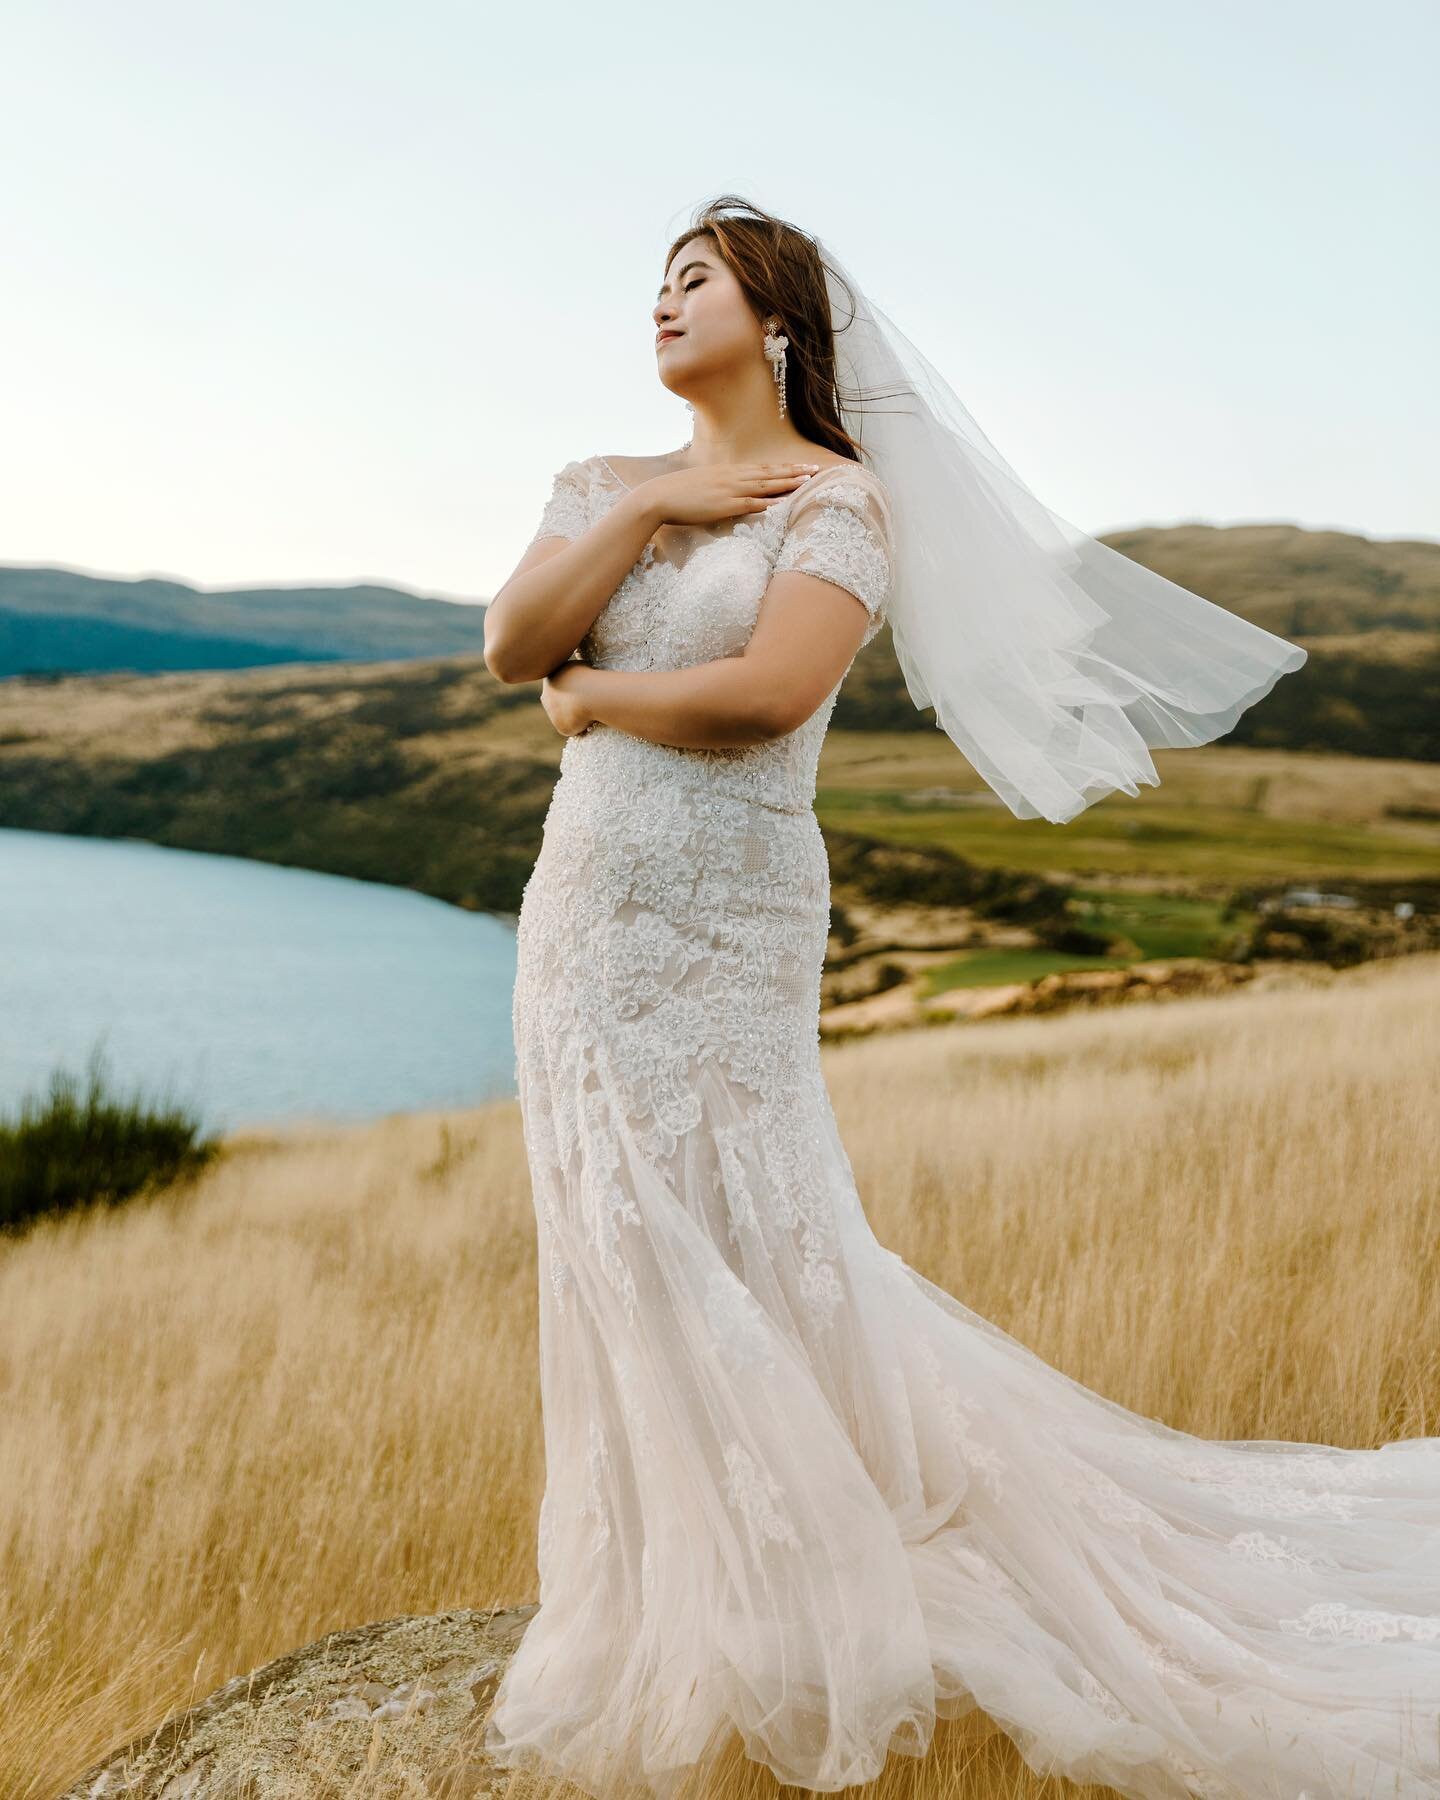 Beautiful wedding dress hire in Queenstown New Zealand

Bust: 82-96cm / Waist 66-75cm (S-M）

Link in Bio for more packages information 

Photo @feliximage
Hair&amp;Makeup @yuki.makeupartist 

#queenstownweddingdress #queenstownweddingdresshire #weddi